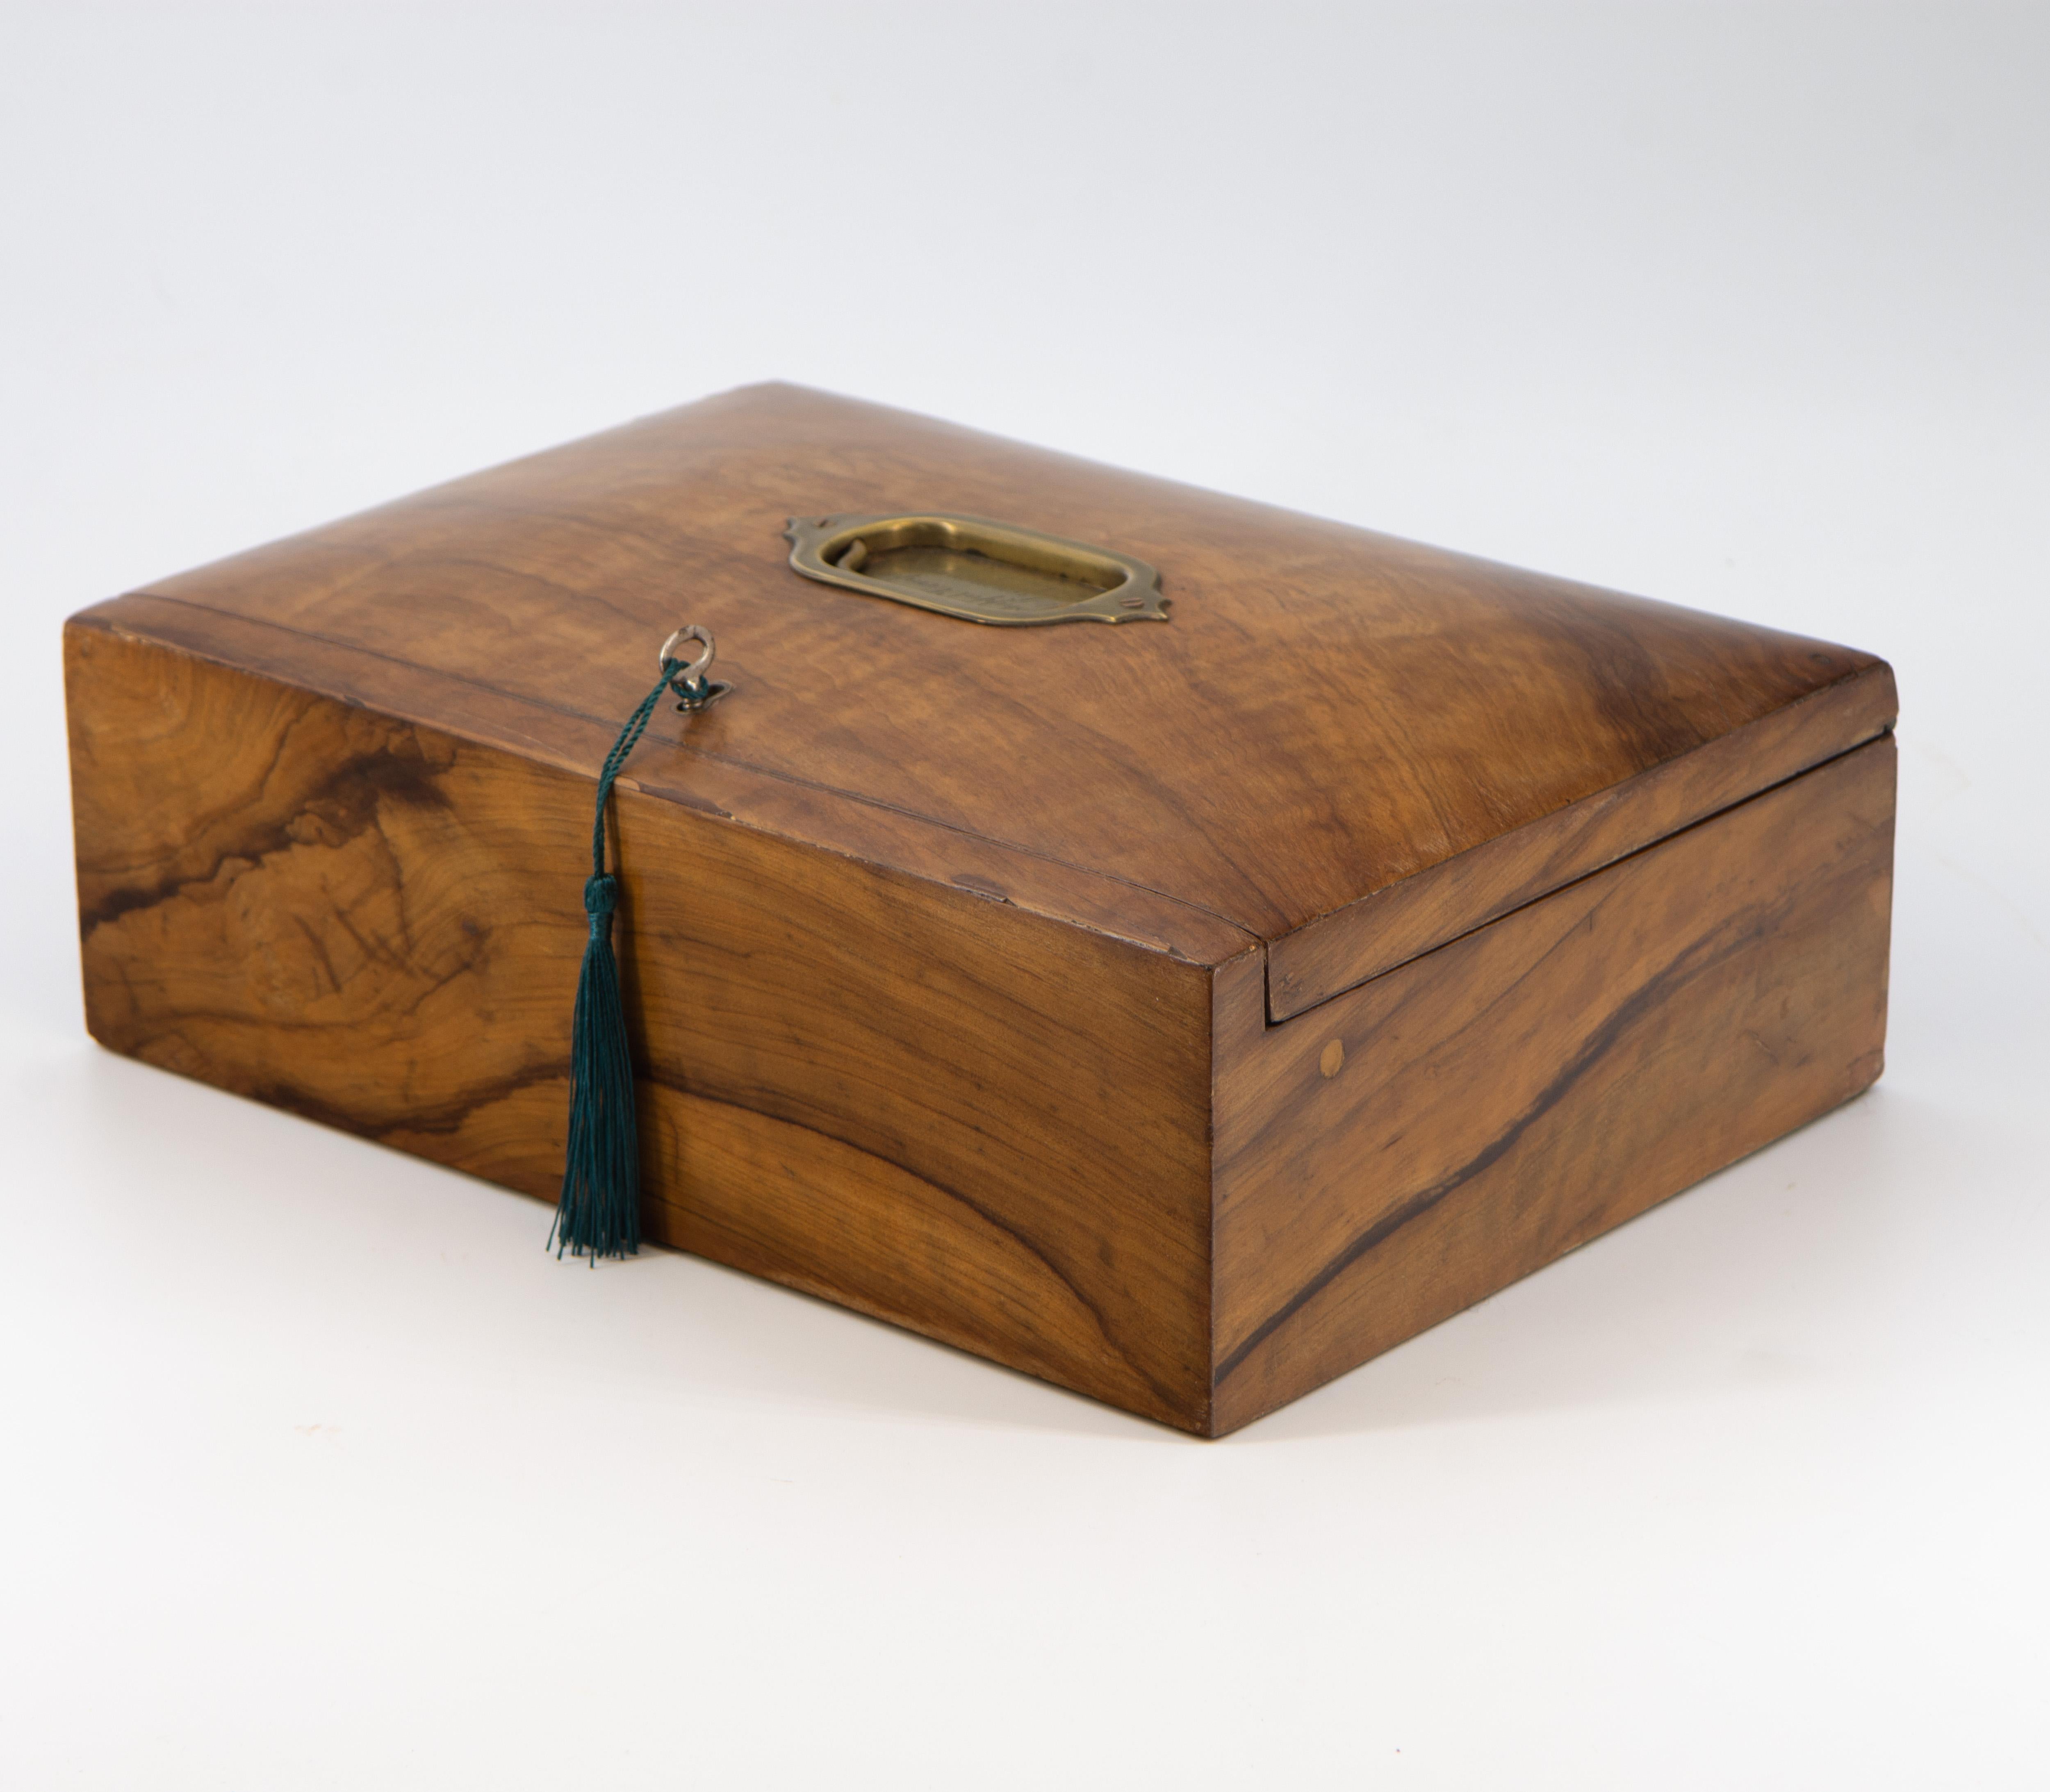 A small antique olive wood writing slope, stationery box. English. Circa 1880.

Delivery included via a selected parcel company. 

The interior reveals a stationery upstand which lifts on a leather tag. It also includes a pen tray and inkwell